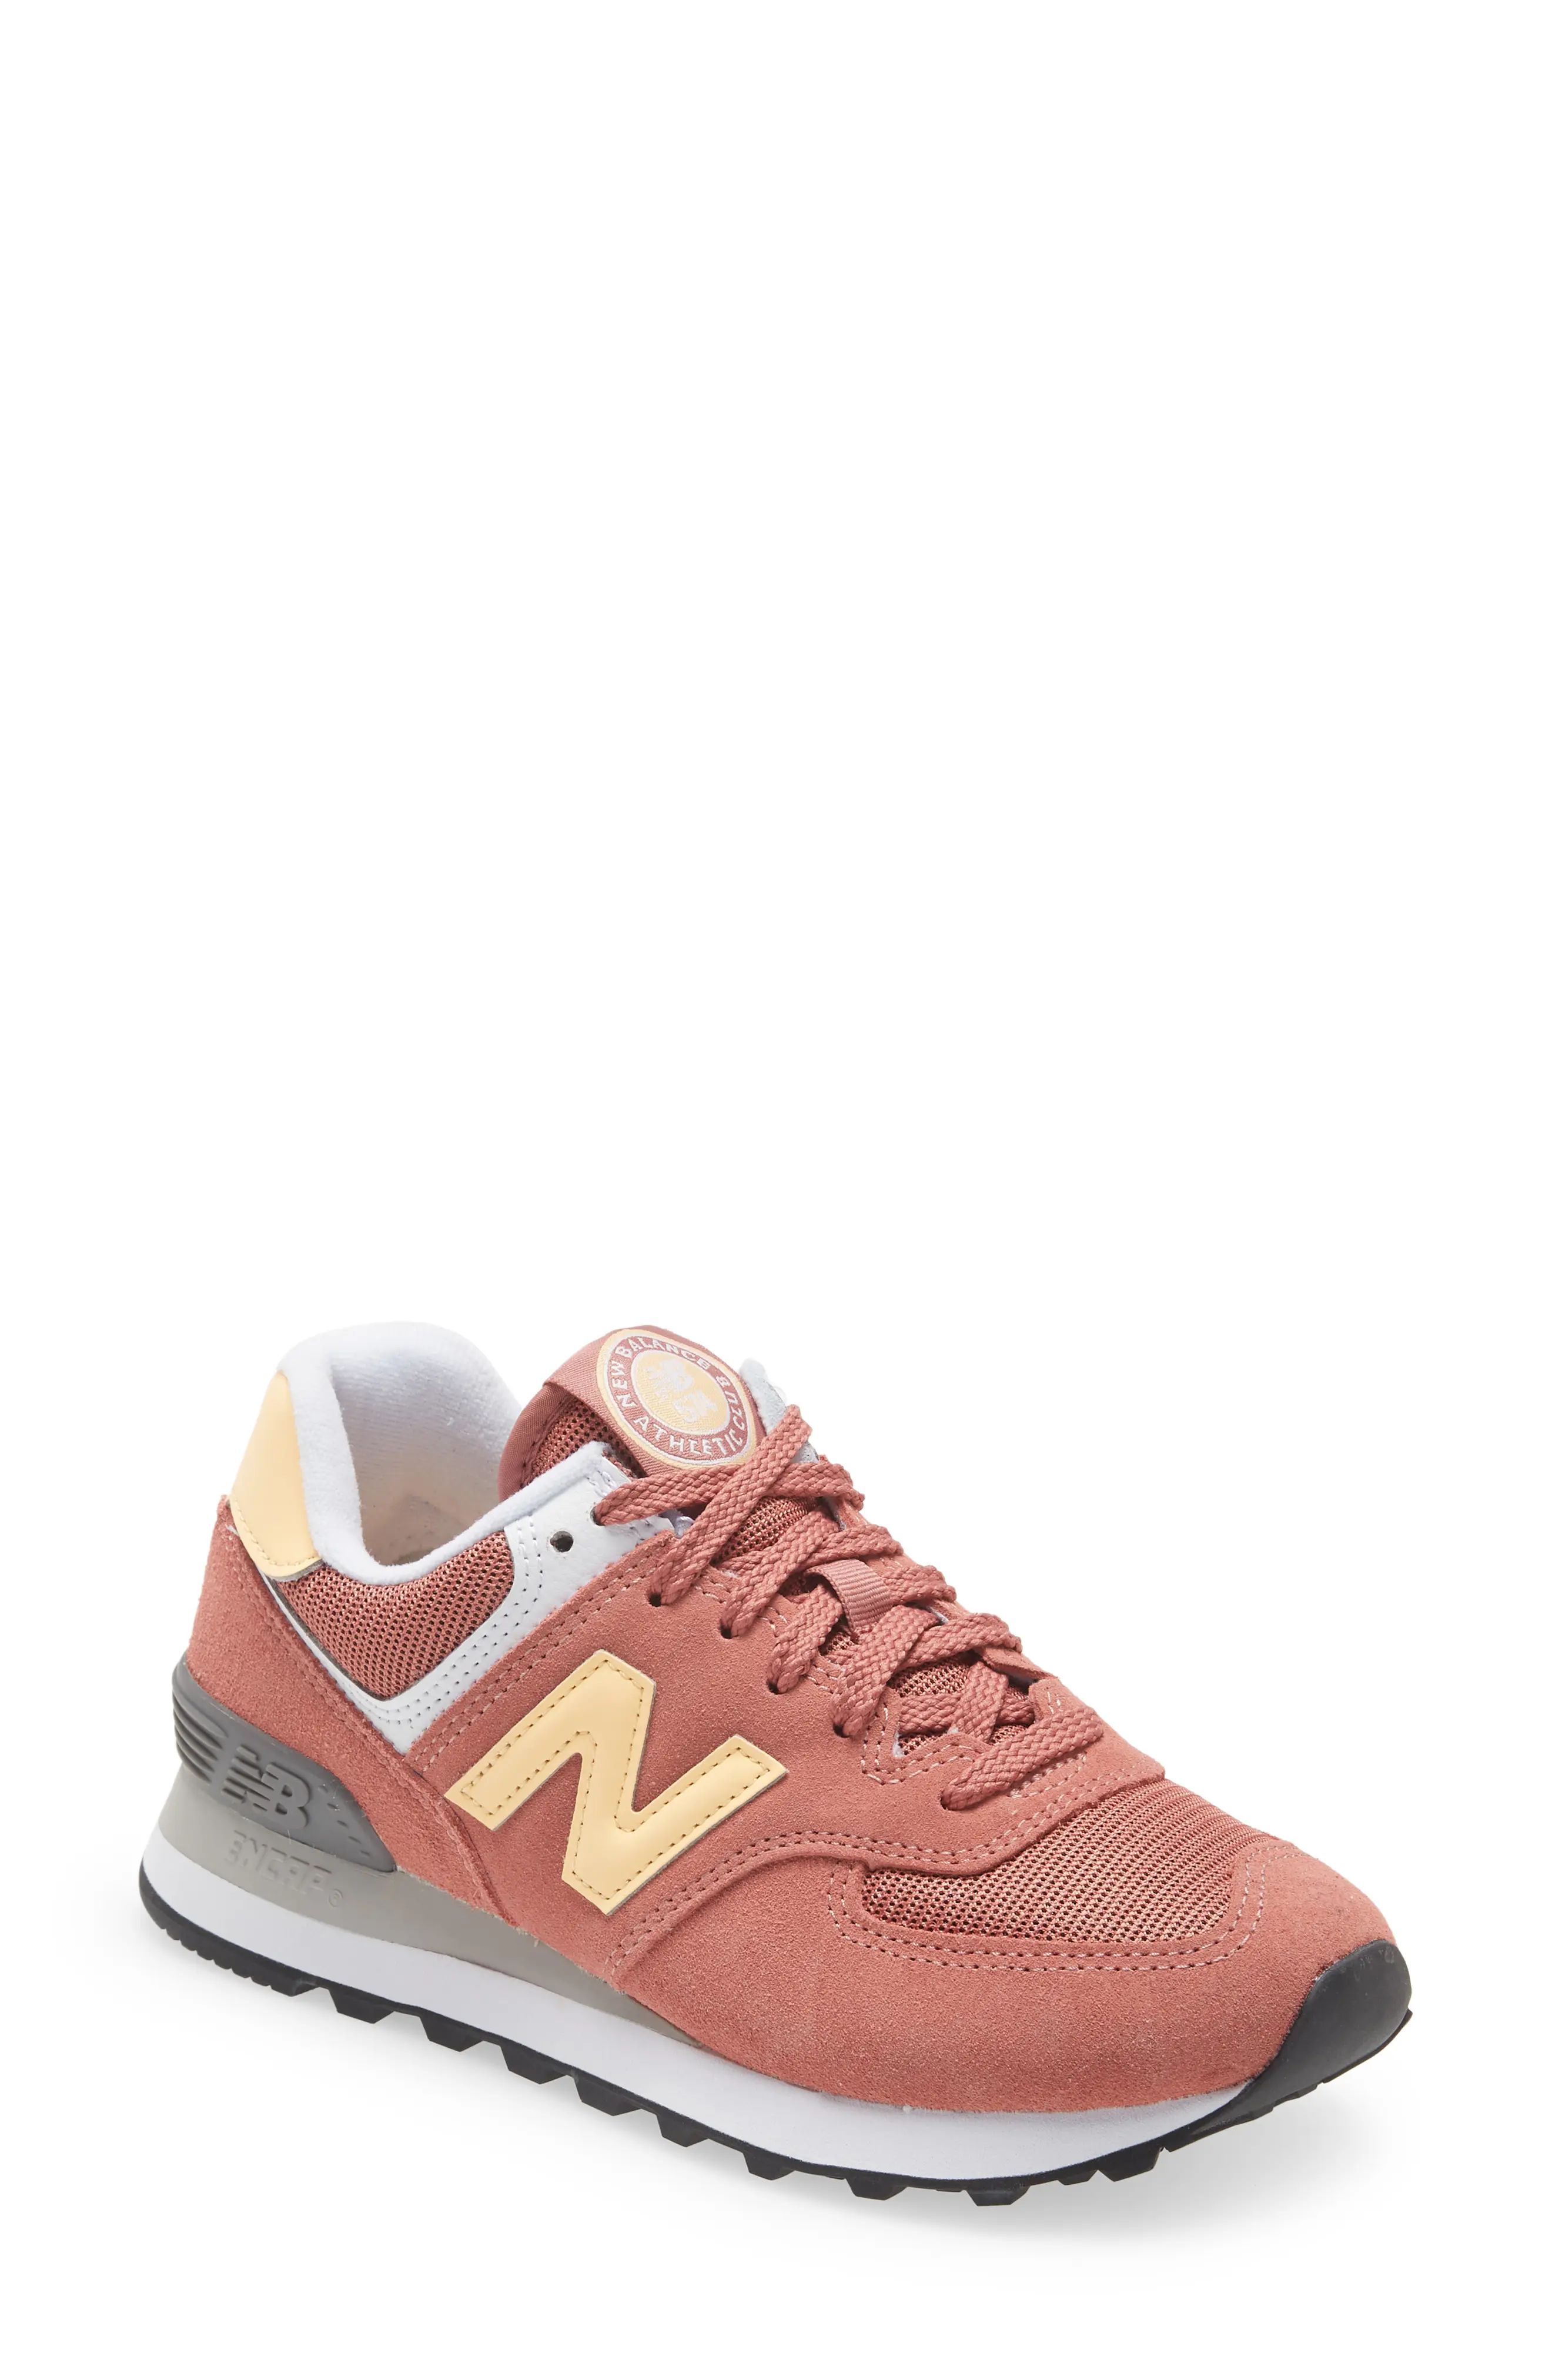 New Balance 574 Sneaker in Astral Glow at Nordstrom, Size 6.5 | Nordstrom